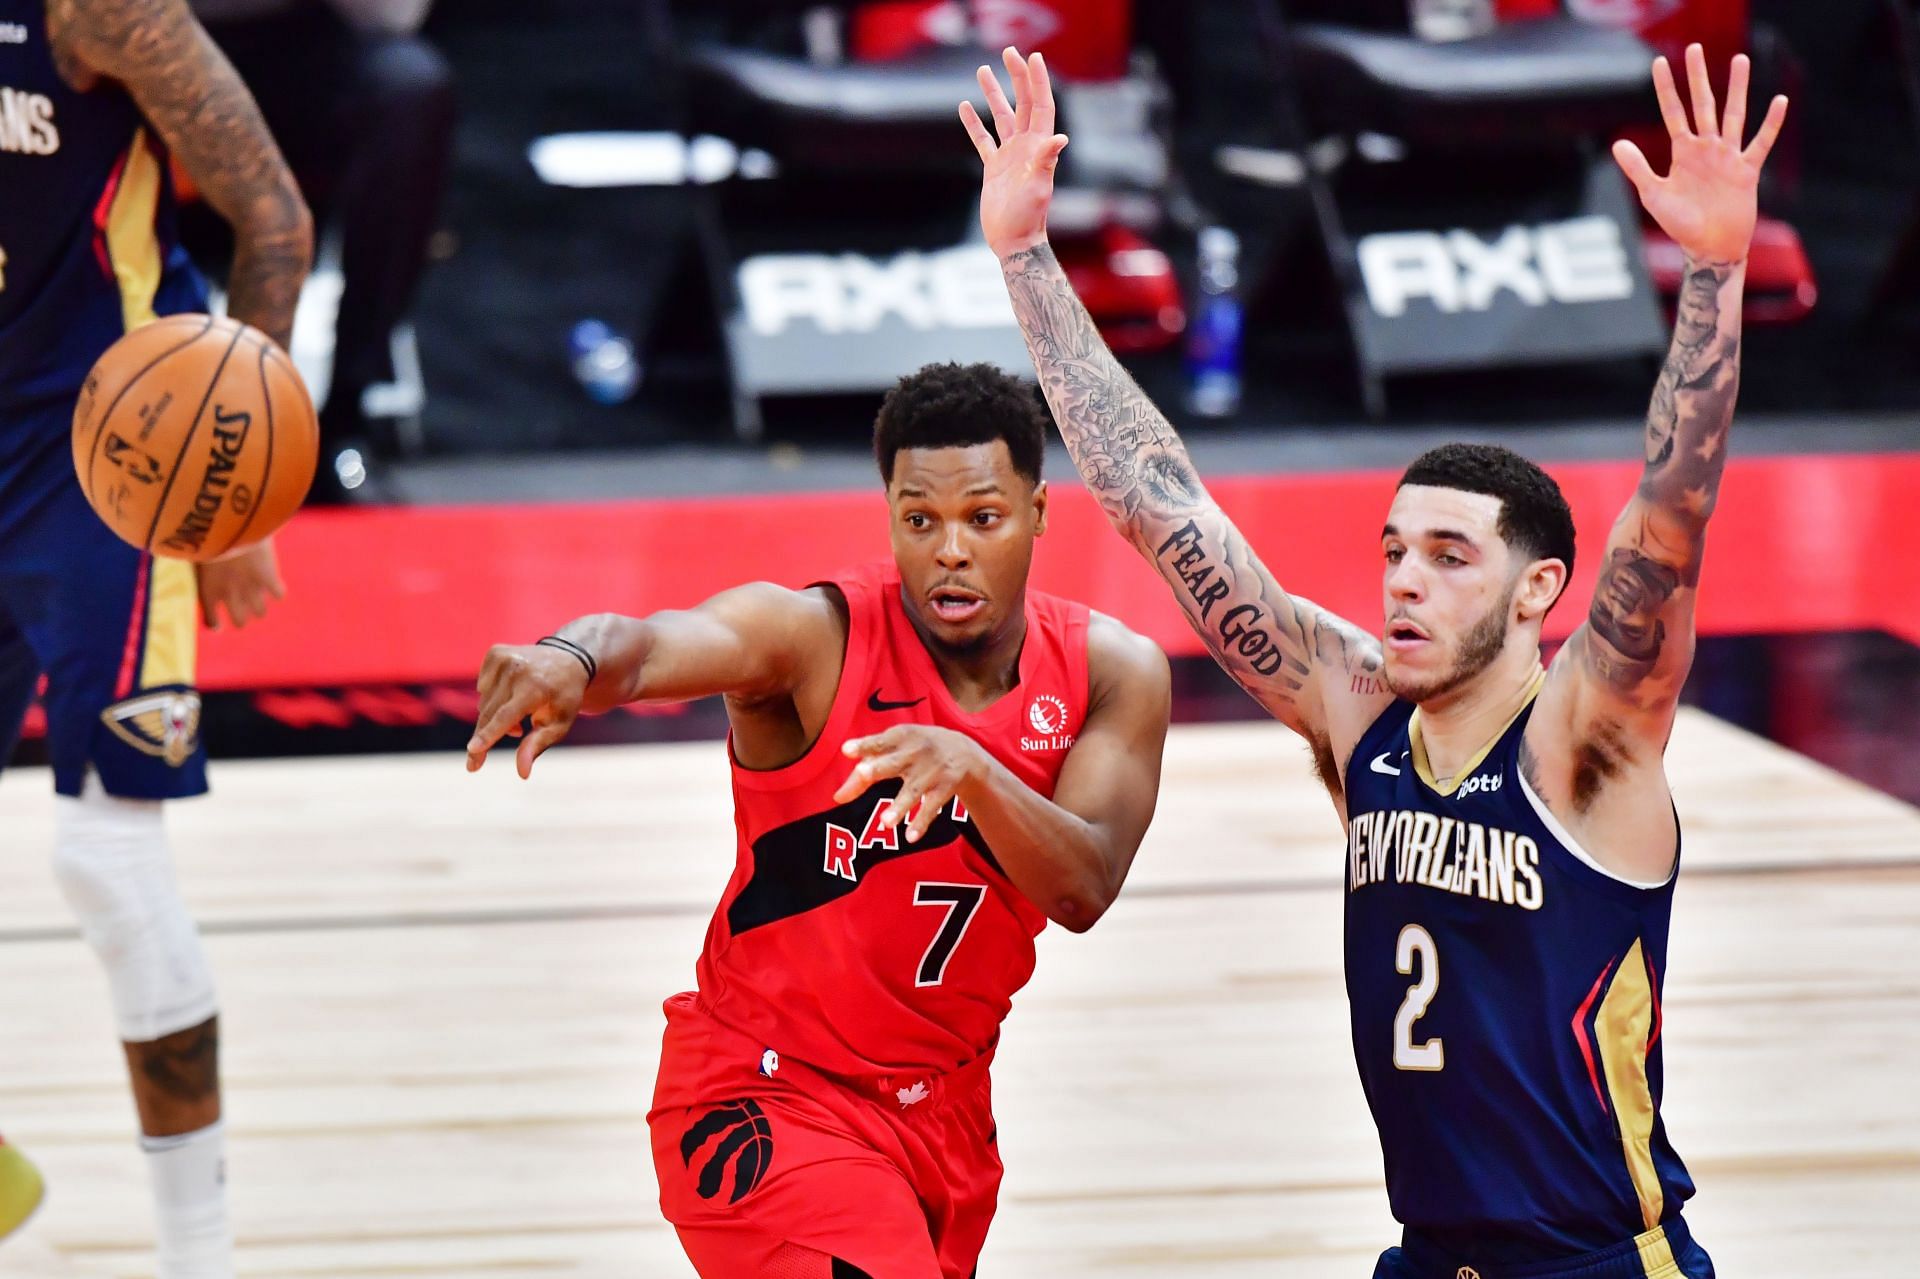 Kyle Lowry and Lonzo Ball trades are under inestigation by the NBA